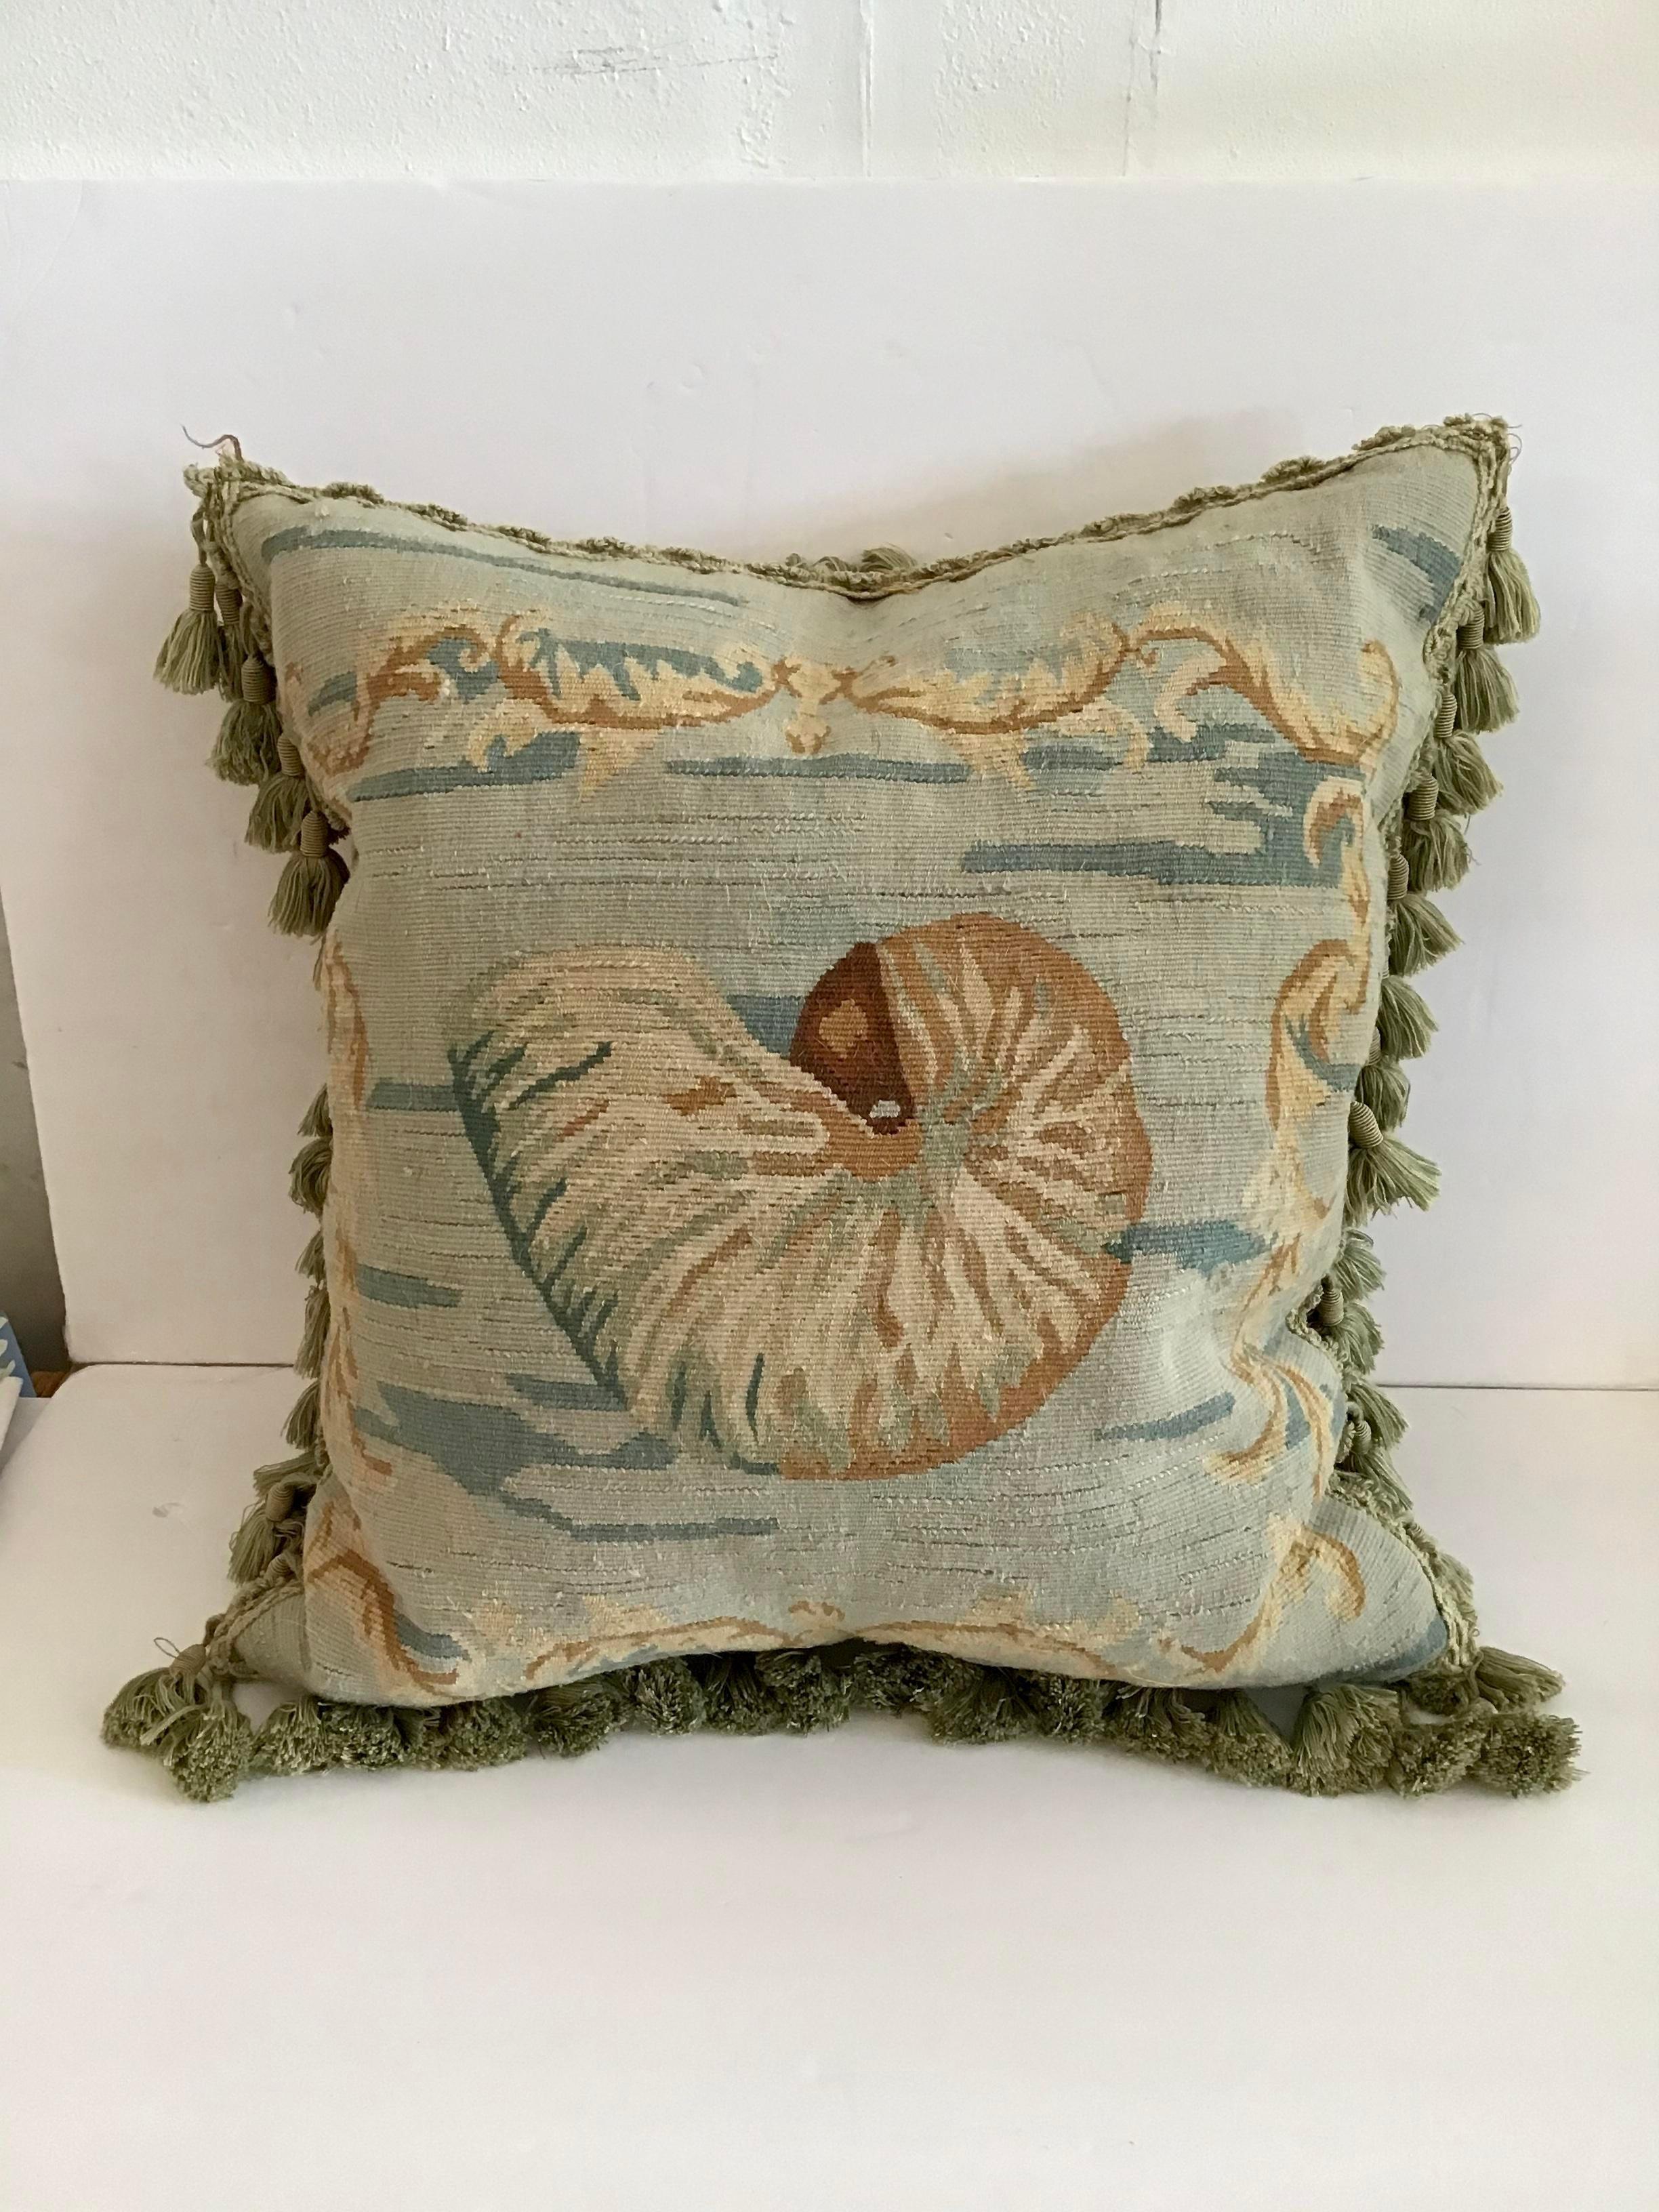 Gorgeous handwork on this Aubusson down pillow with decorative fringe. Add some chic style to your decor.